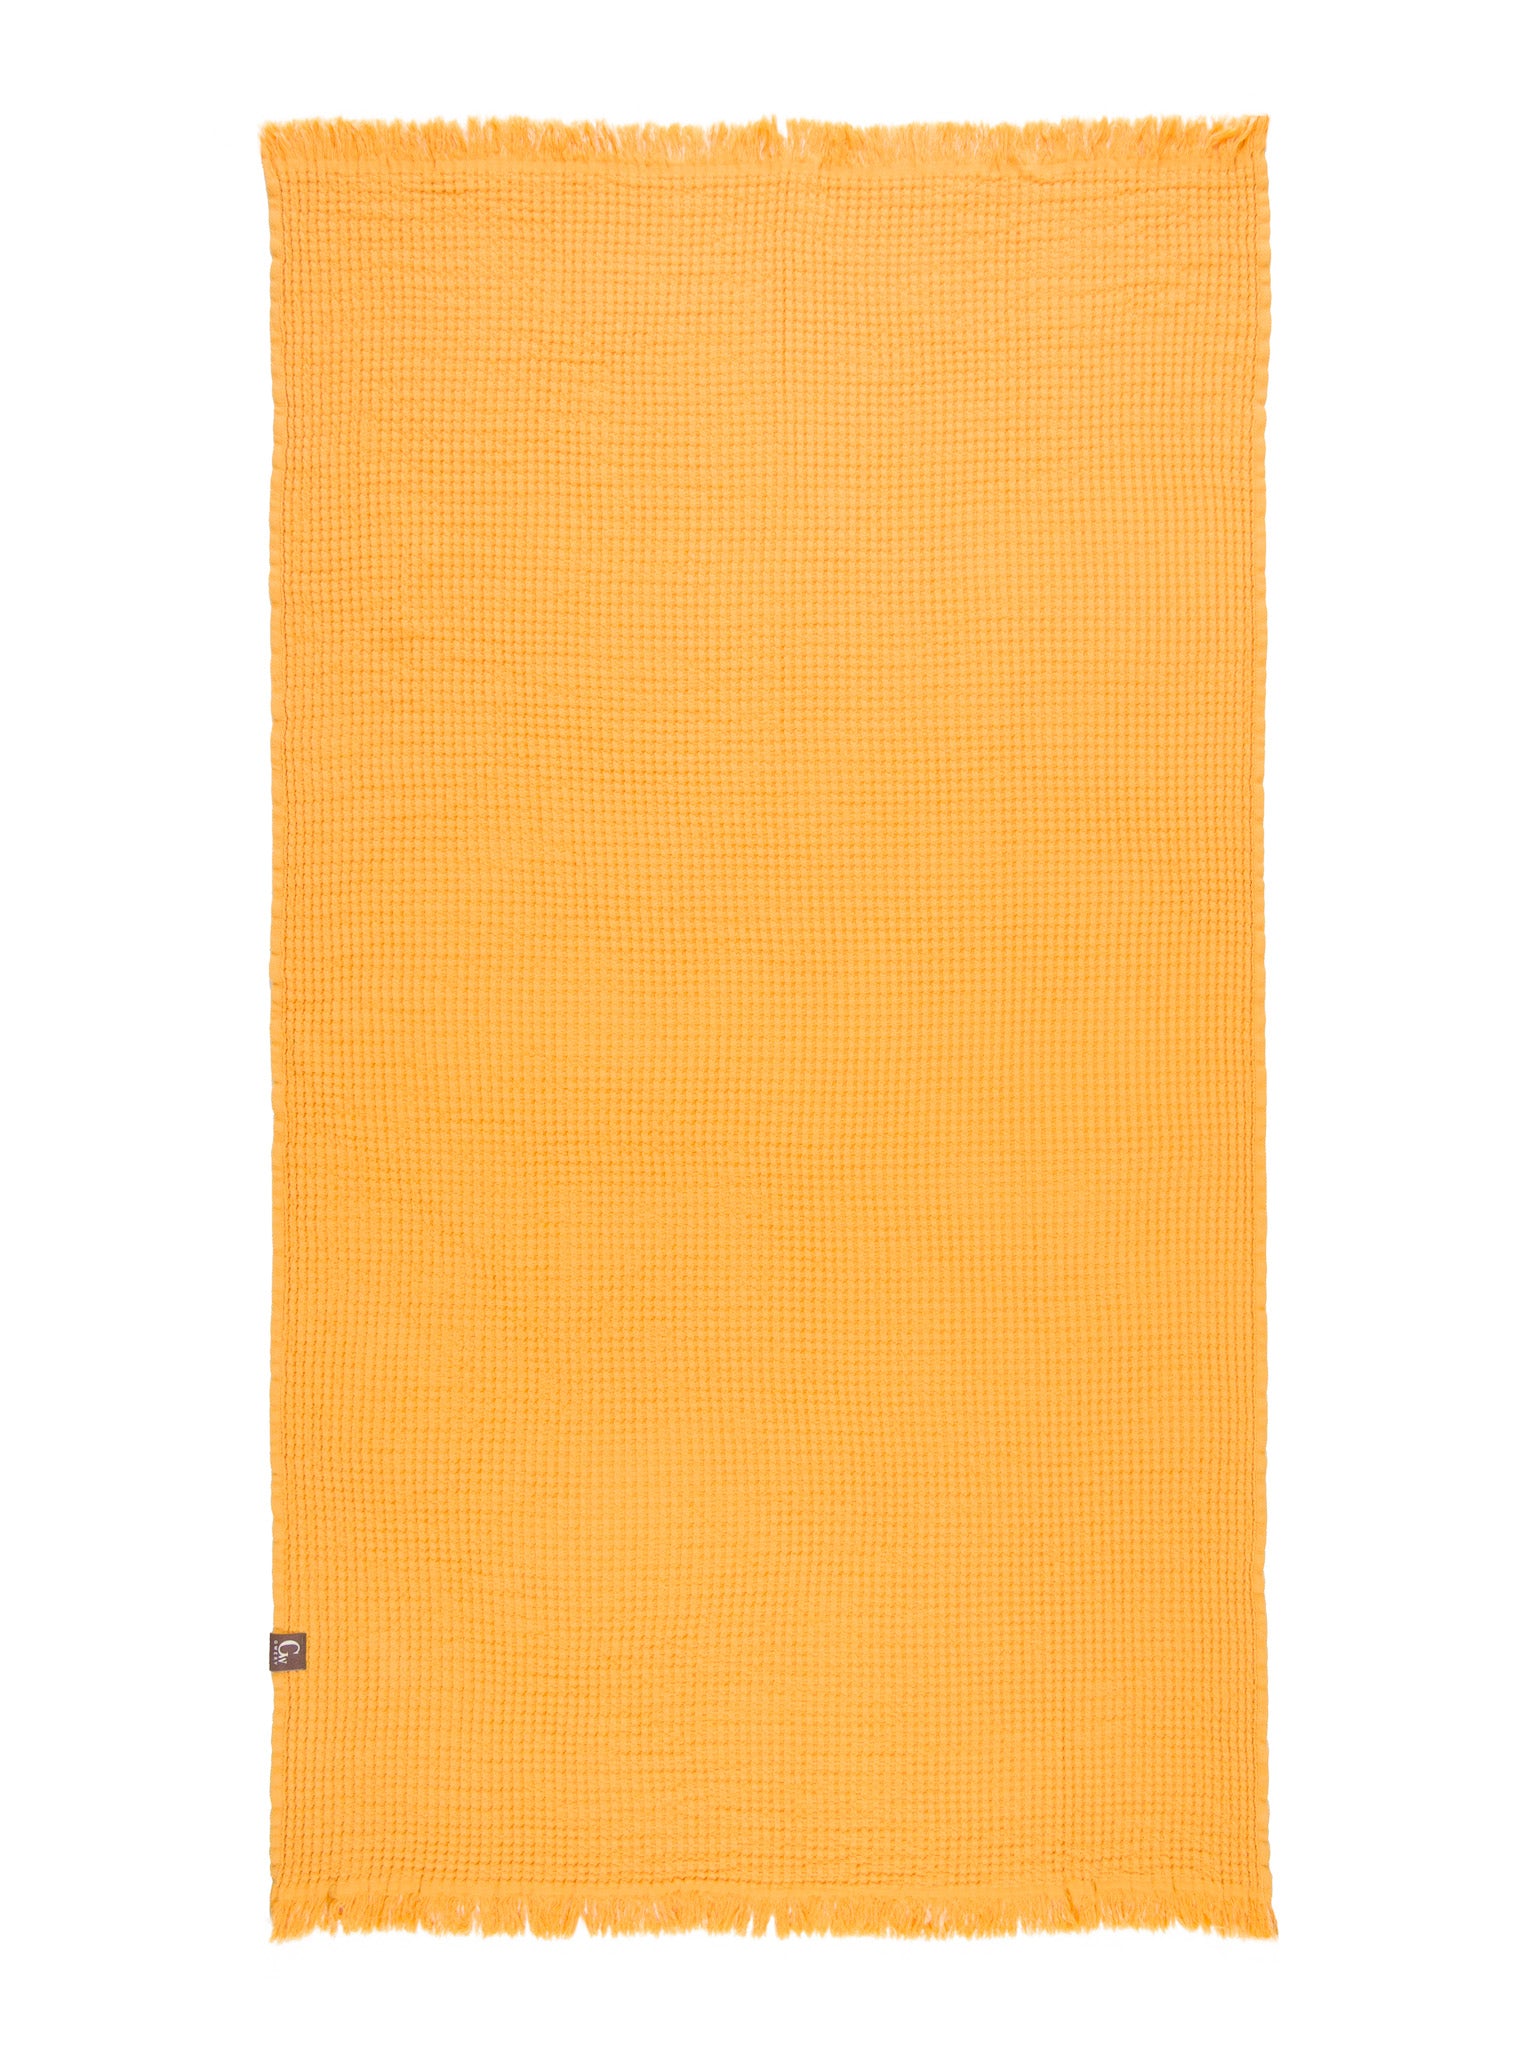 Yellow double sided honeycomb beach towel open up